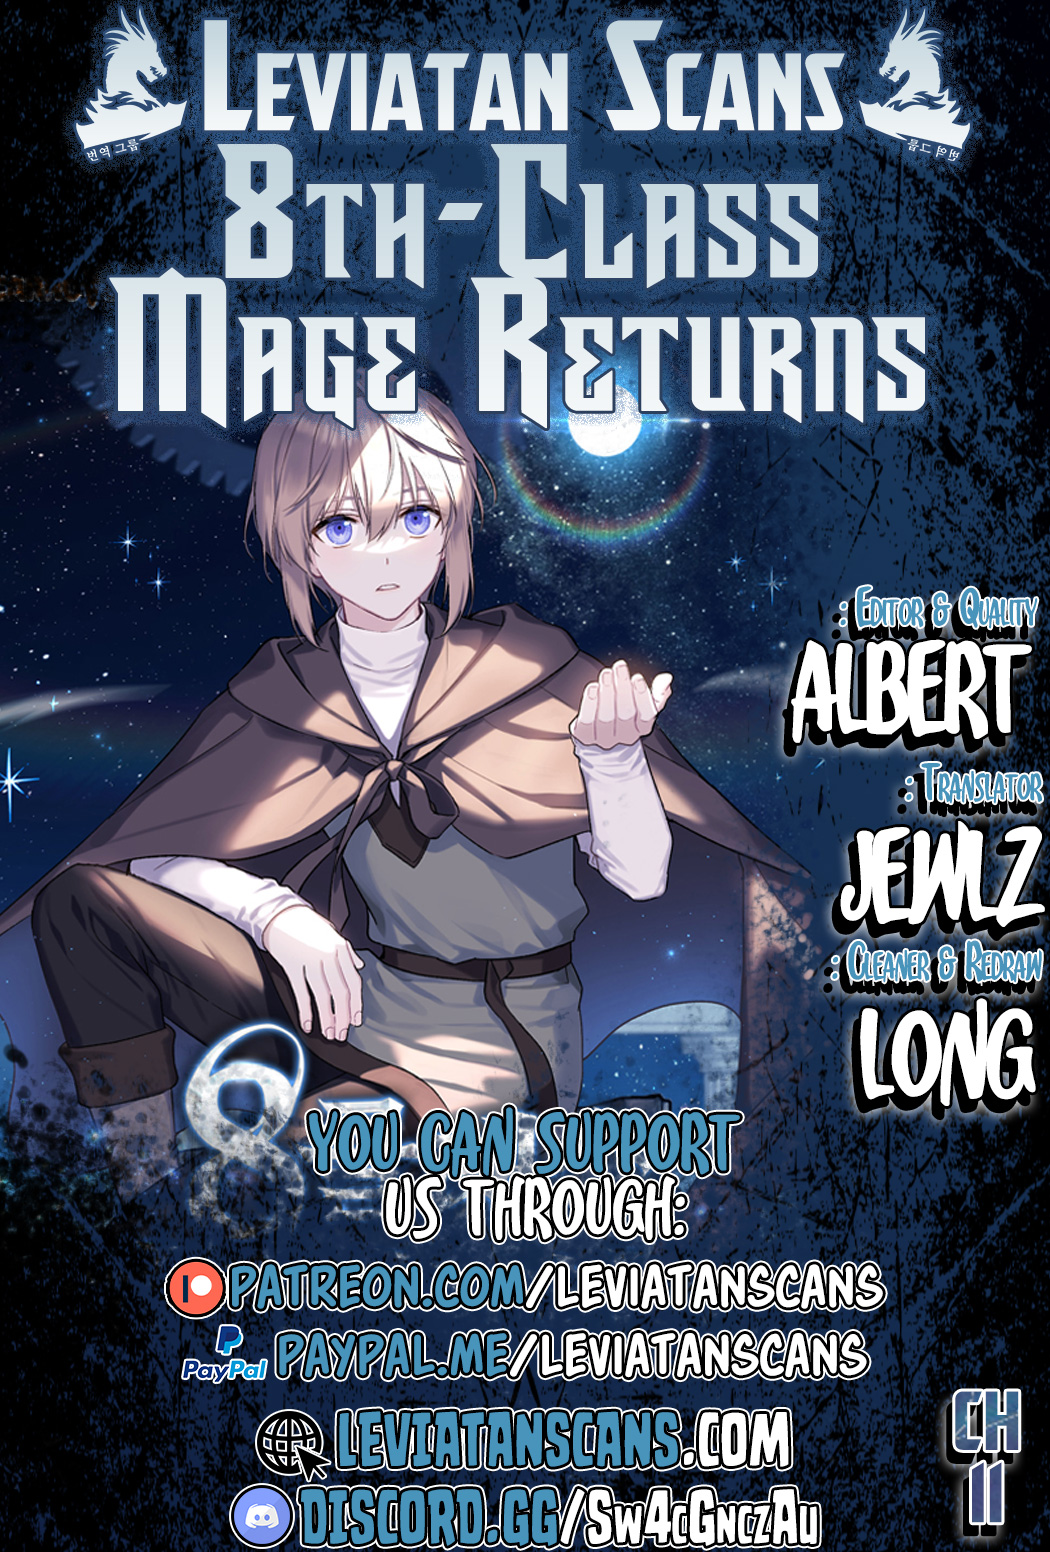 Return of the 8th Class Magician - Chapter 7130 - Image 1